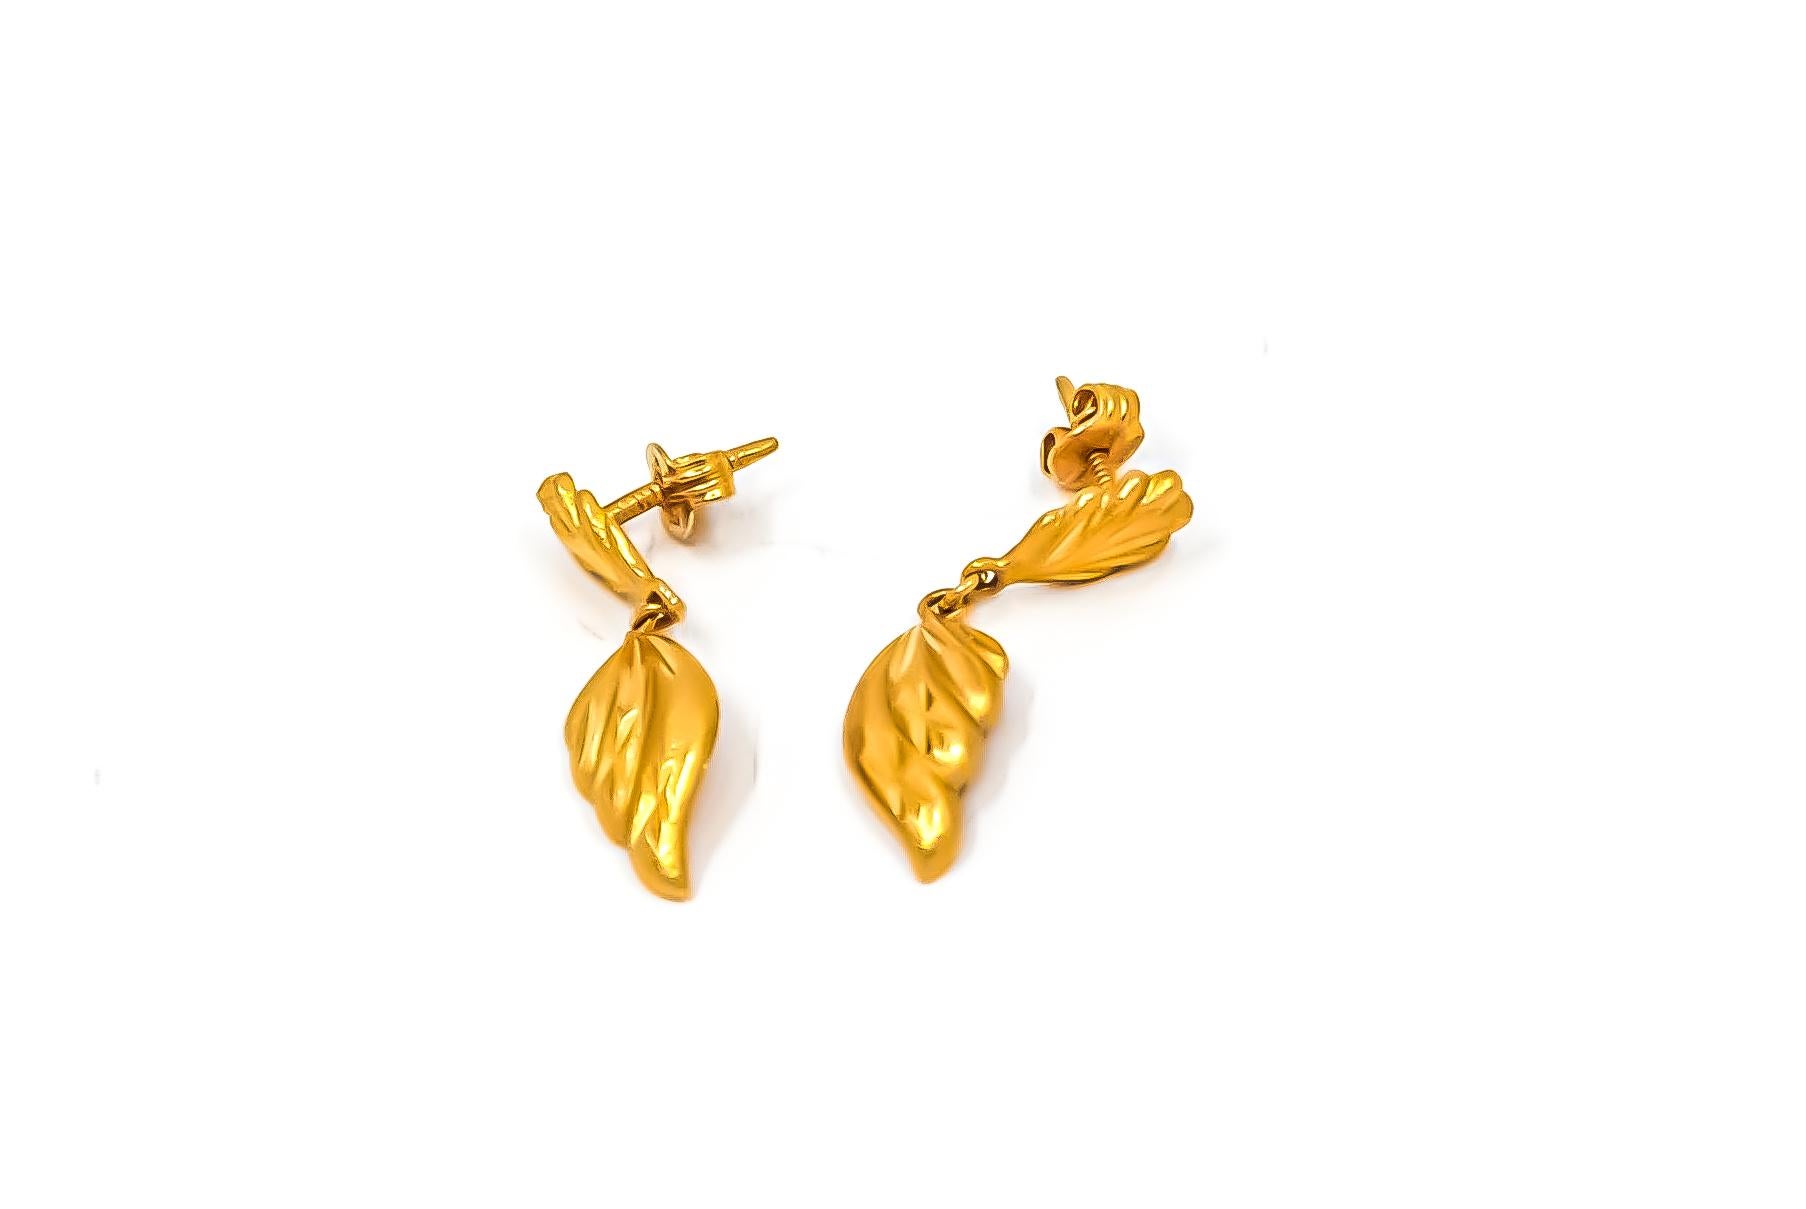 Vintage Greek Drop Earrings made in 22 Karat Yellow Gold dating back to 1960s.

Features:
Push back earrings
Brushed finishing with few polished front sides.

Dimensions
Length - 30mm
Width - 8mm
